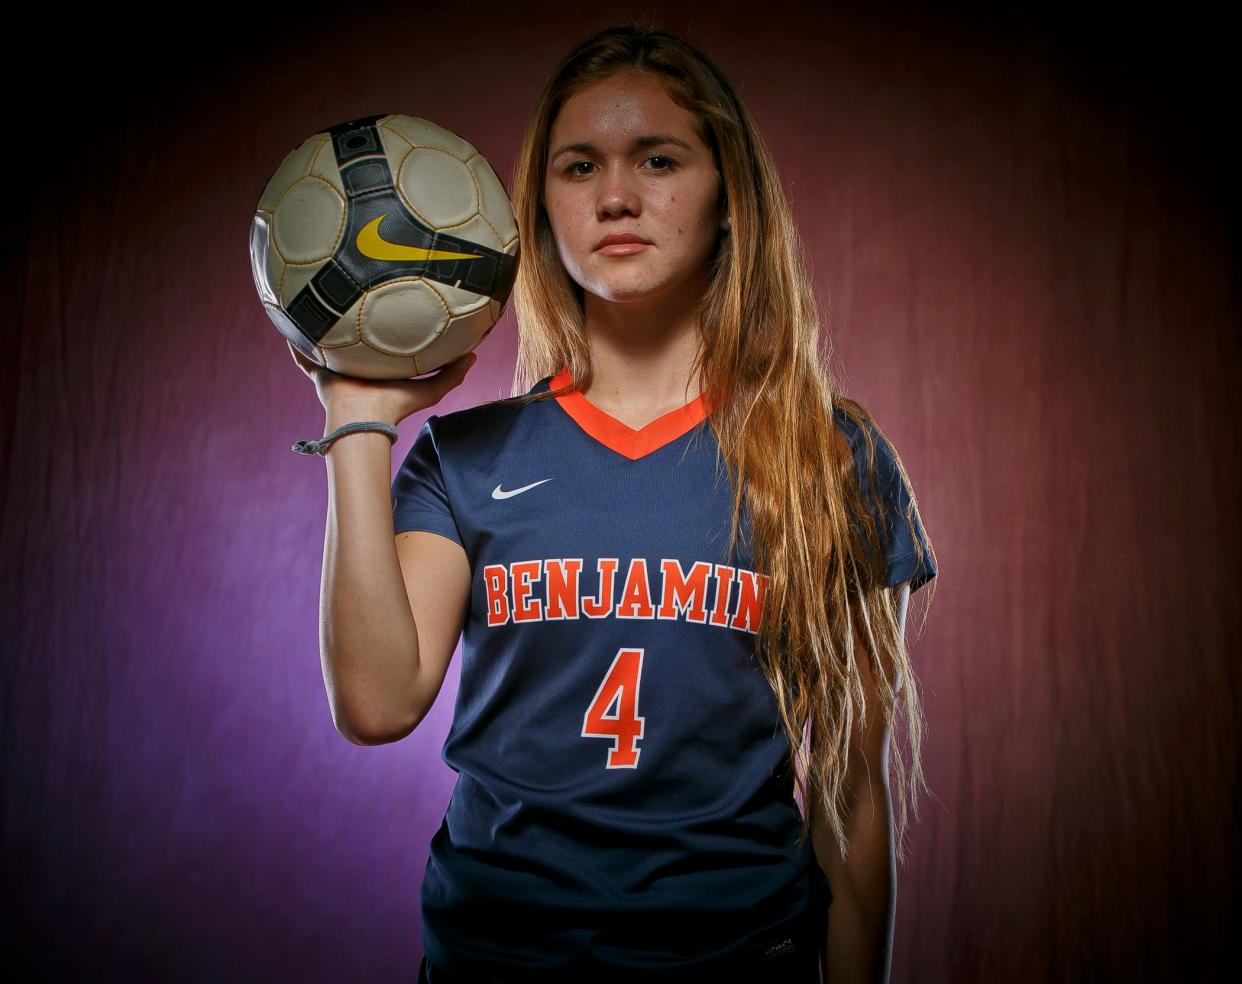 Mayra Pelayo, a senior at The Benjamin School, is the All-Area Small School Girls Soccer Player of the Year. Photographed at the Palm Beach Post studio on March 10, 2015.